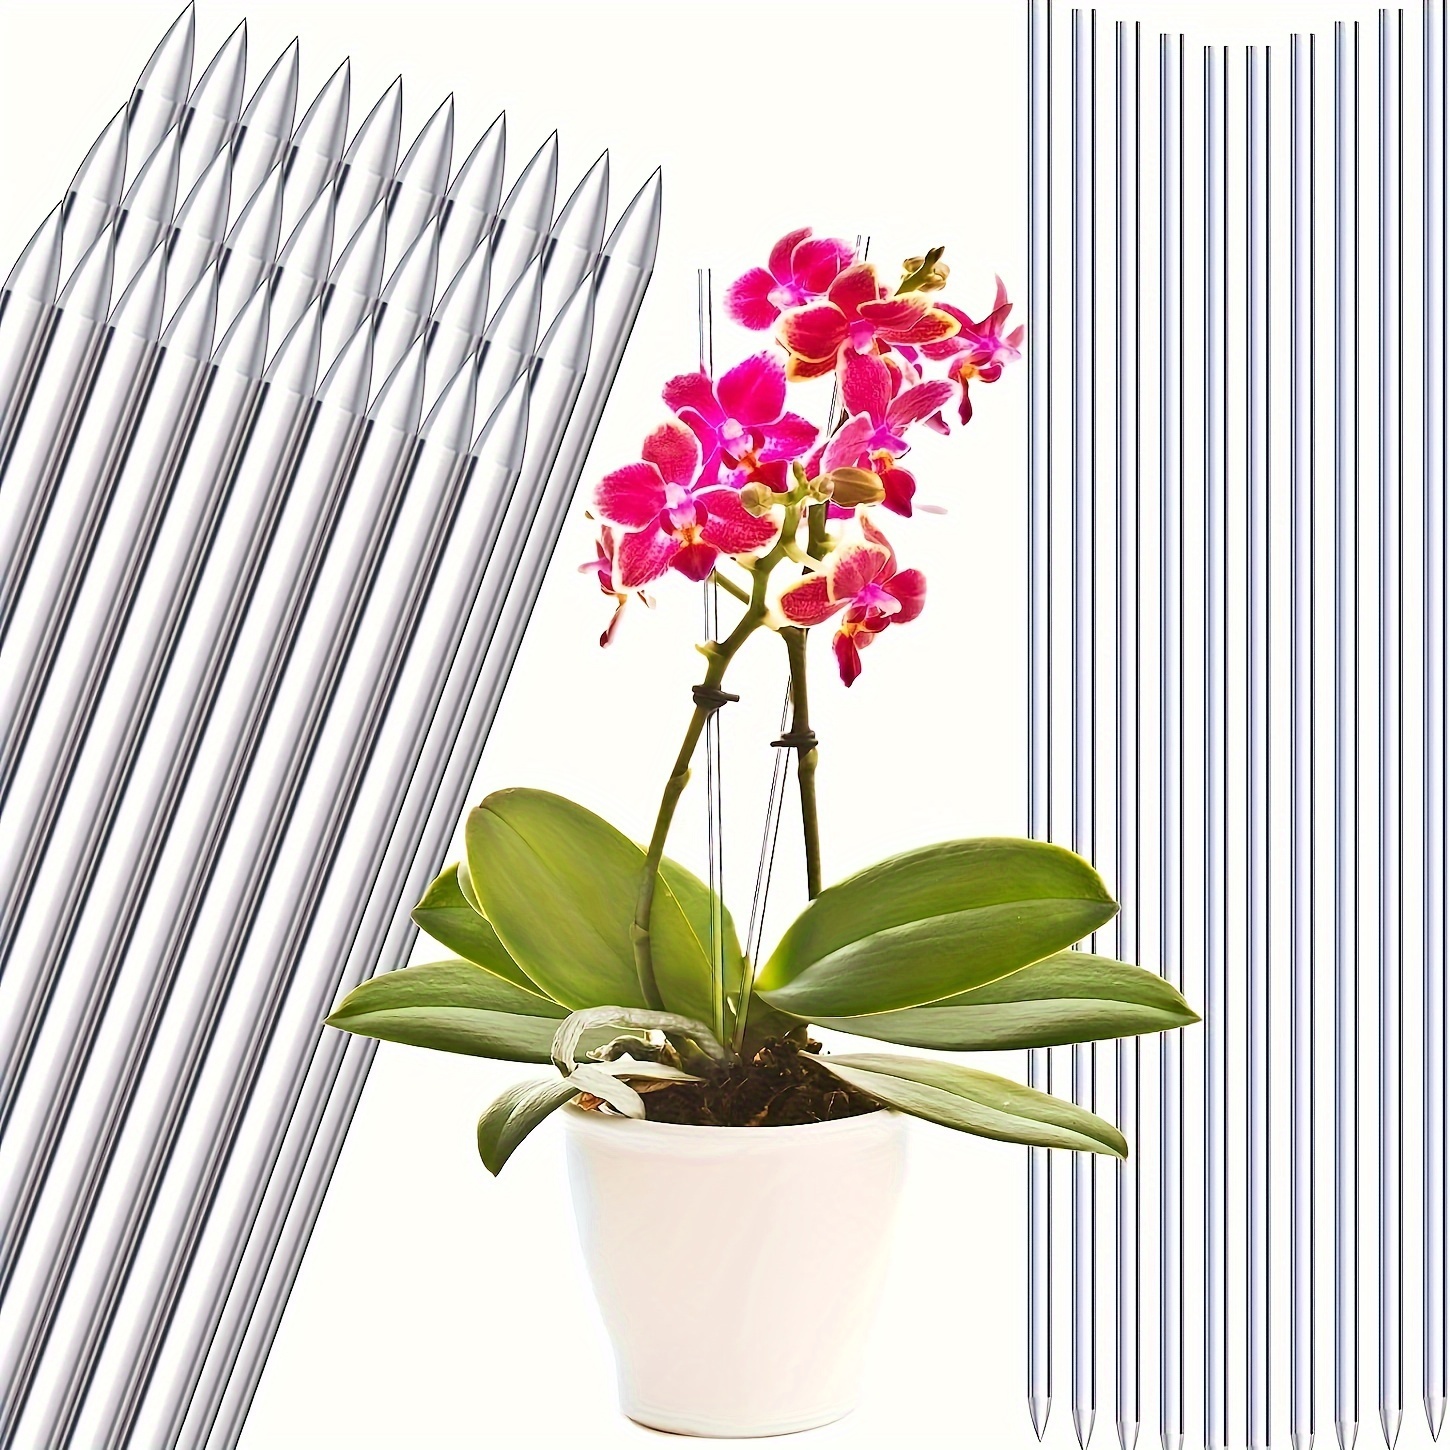 

10pcs, Clear Acrylic Plant Stakes, Transparent Orchid Support Rods, 15.7 Inches/garden Stakes For Potted Plant Stability, Durable Garden Supplies For Upright Growth, Indoor And Outdoor Use